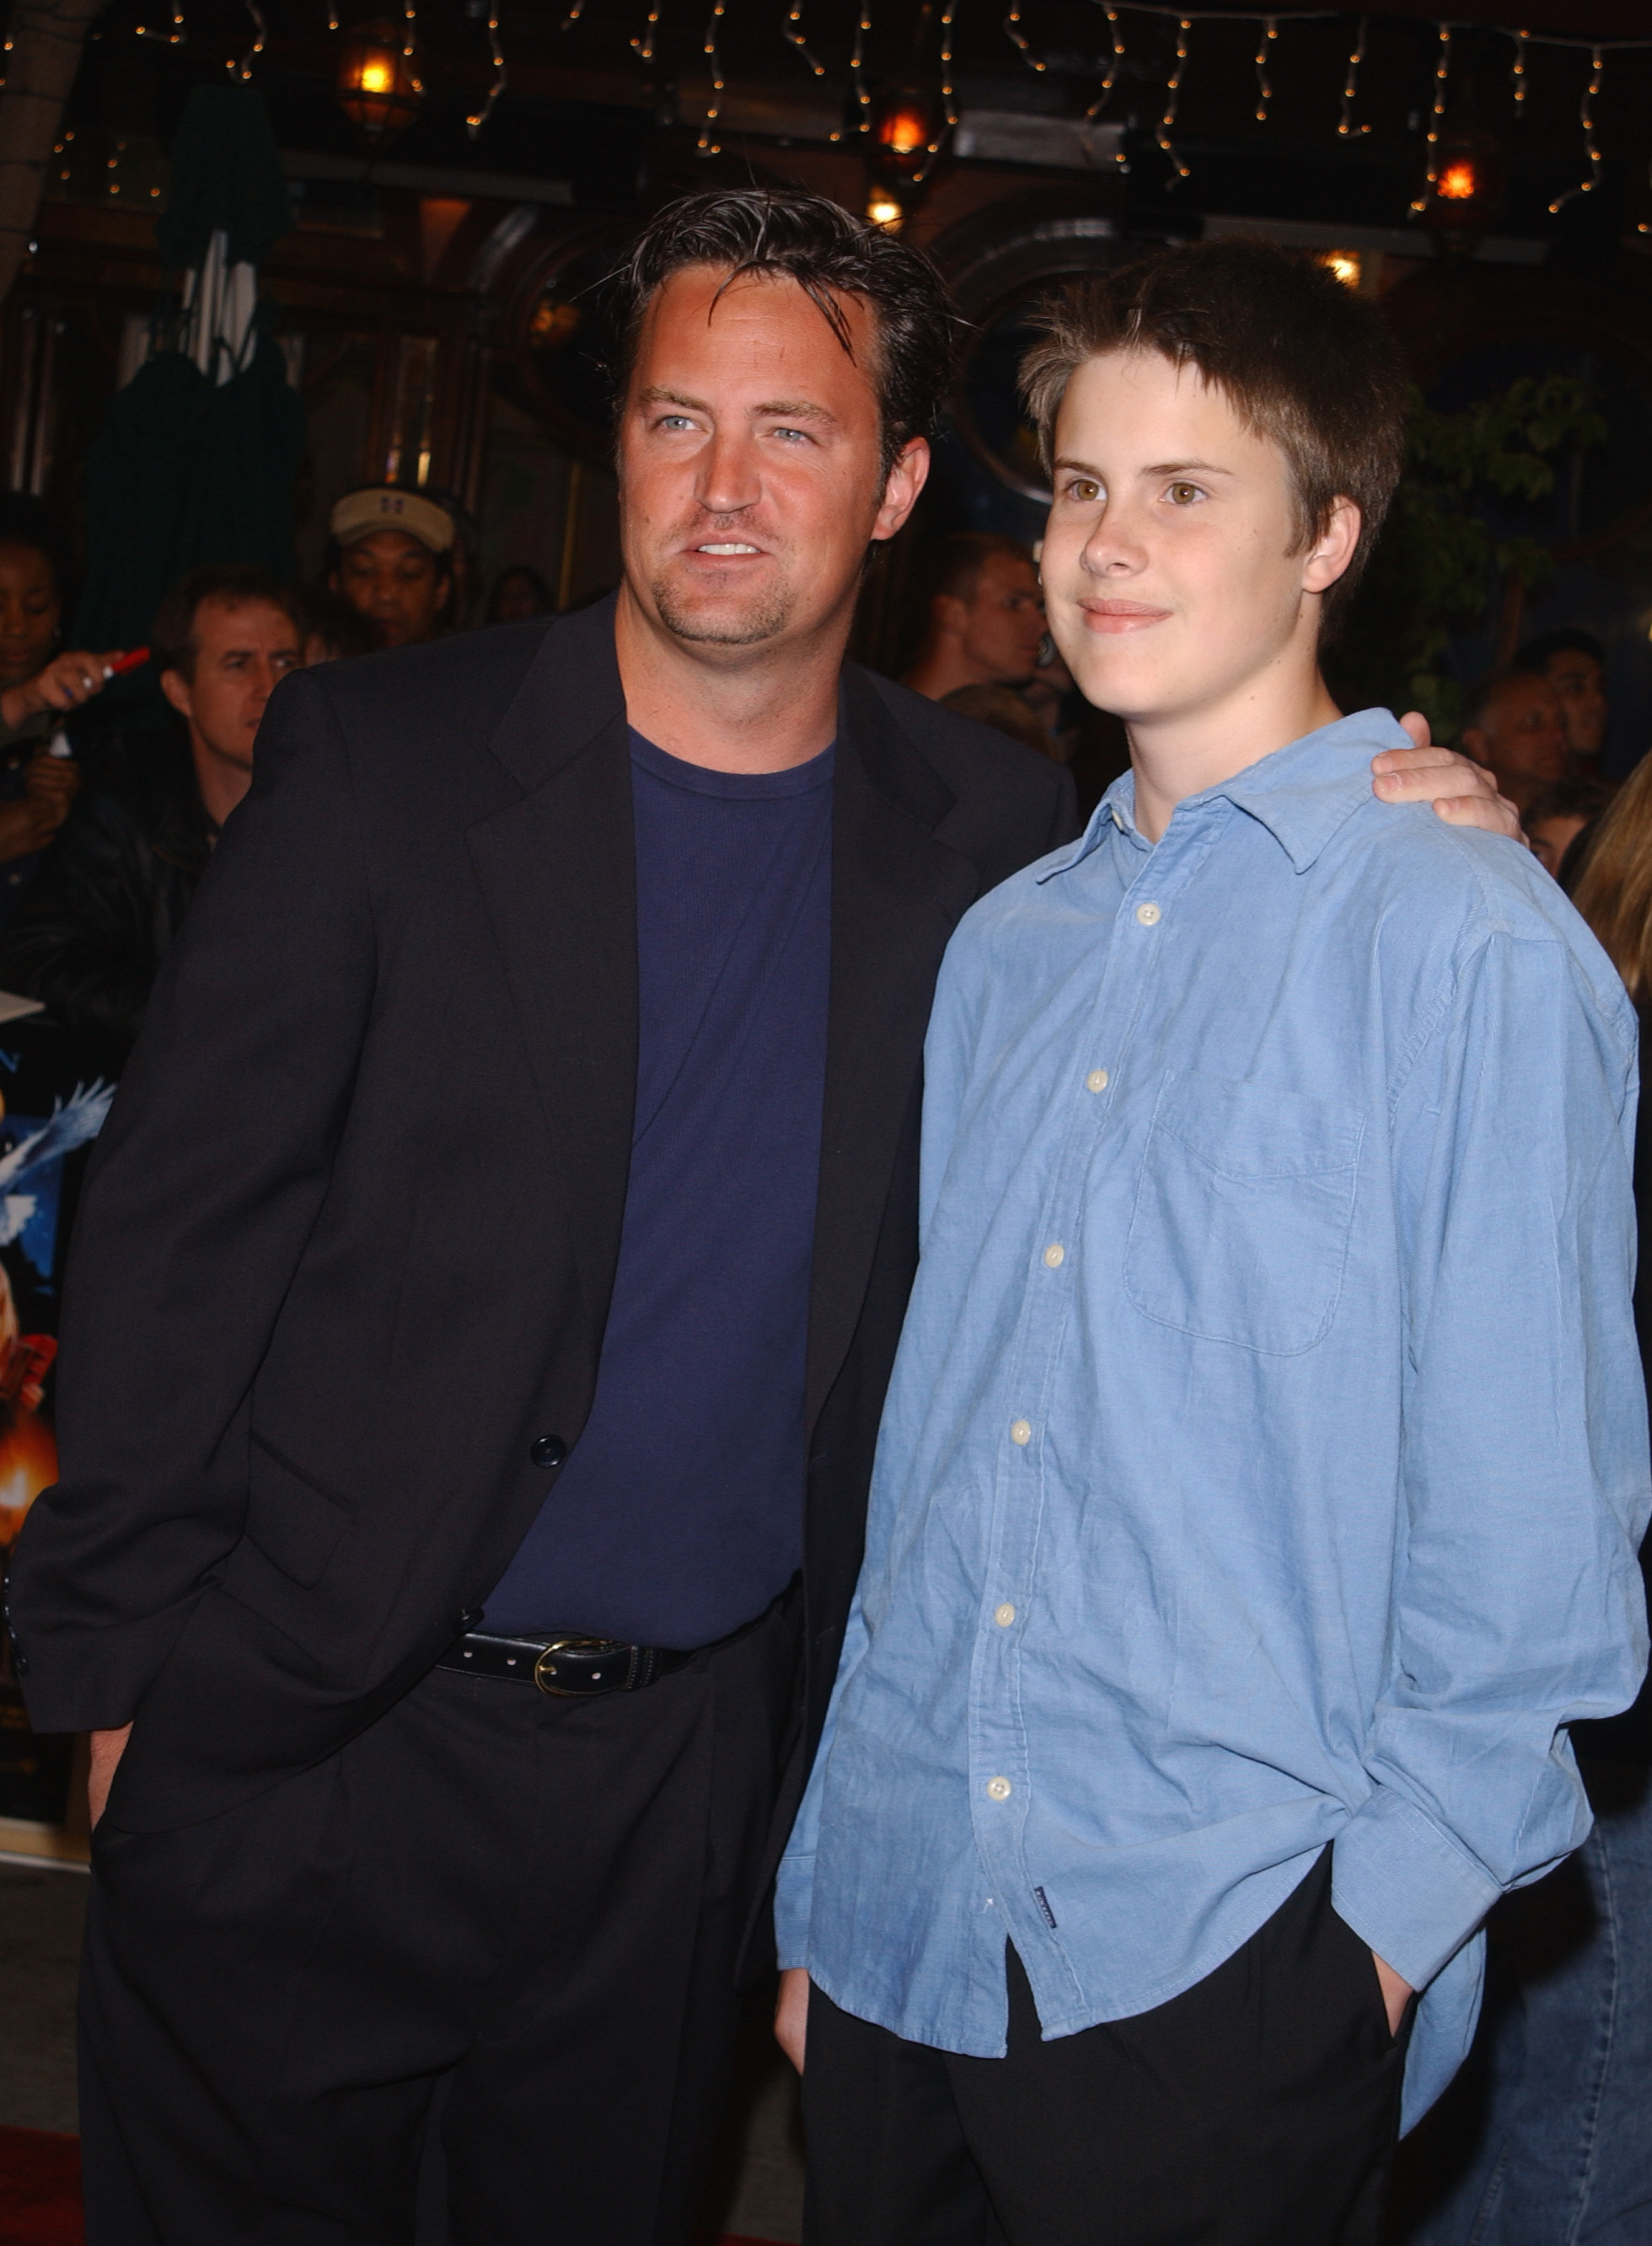 Matthew Perry and his brother Will during the "Harry Potter and the Sorcerer's Stone" premiere on November 14, 2001 in Los Angeles, California | Source: Getty Images